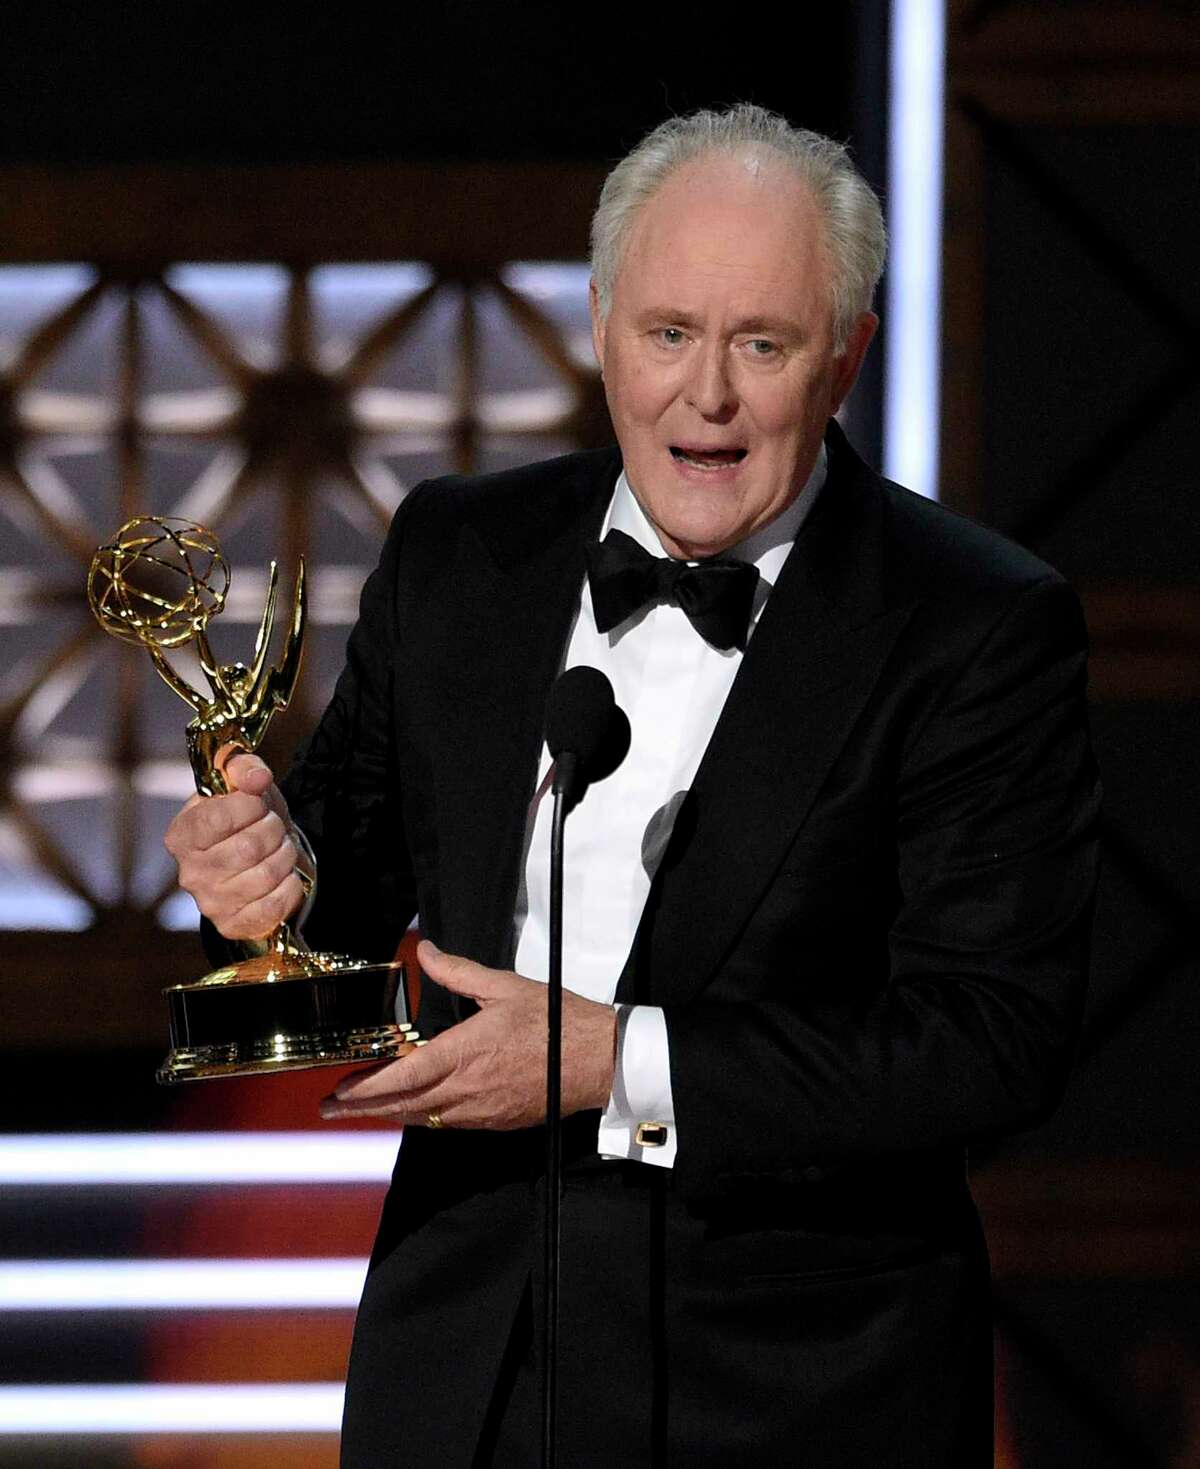 John Lithgow accepts the award for outstanding supporting actor in a drama series for "The Crown" at the 69th Primetime Emmy Awards on Sunday, Sept. 17, 2017, at the Microsoft Theater in Los Angeles. (Photo by Chris Pizzello/Invision/AP)